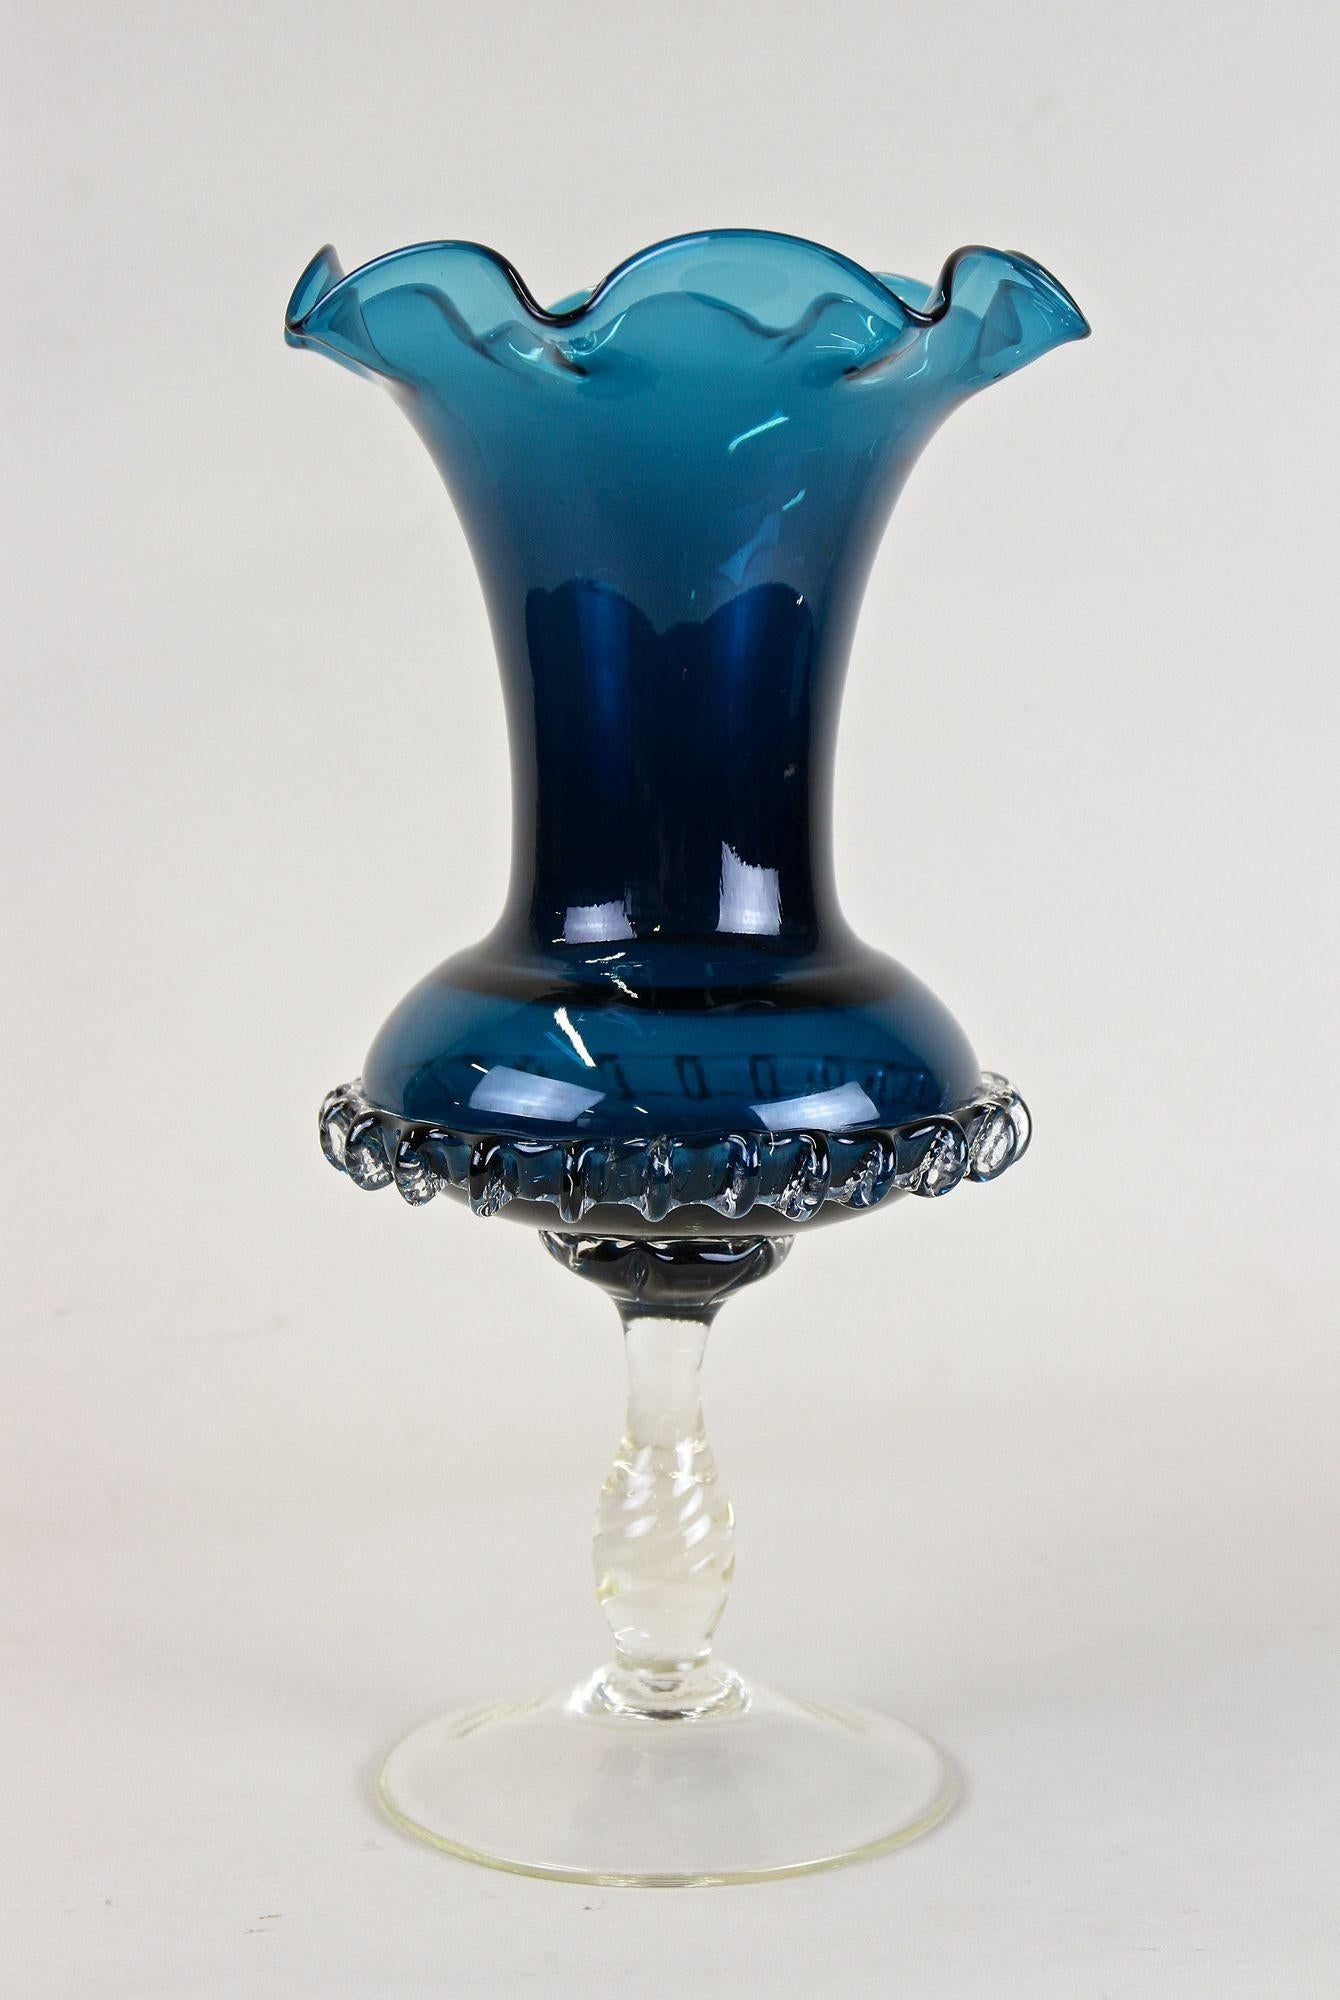 Delicate blue Murano glass vase from the midcentury period around 1960 in Italy. This elegantly shaped vintage glass vase is a perfect example for the world famous Italian glass art from the small island of Murano. The extraordinary design with